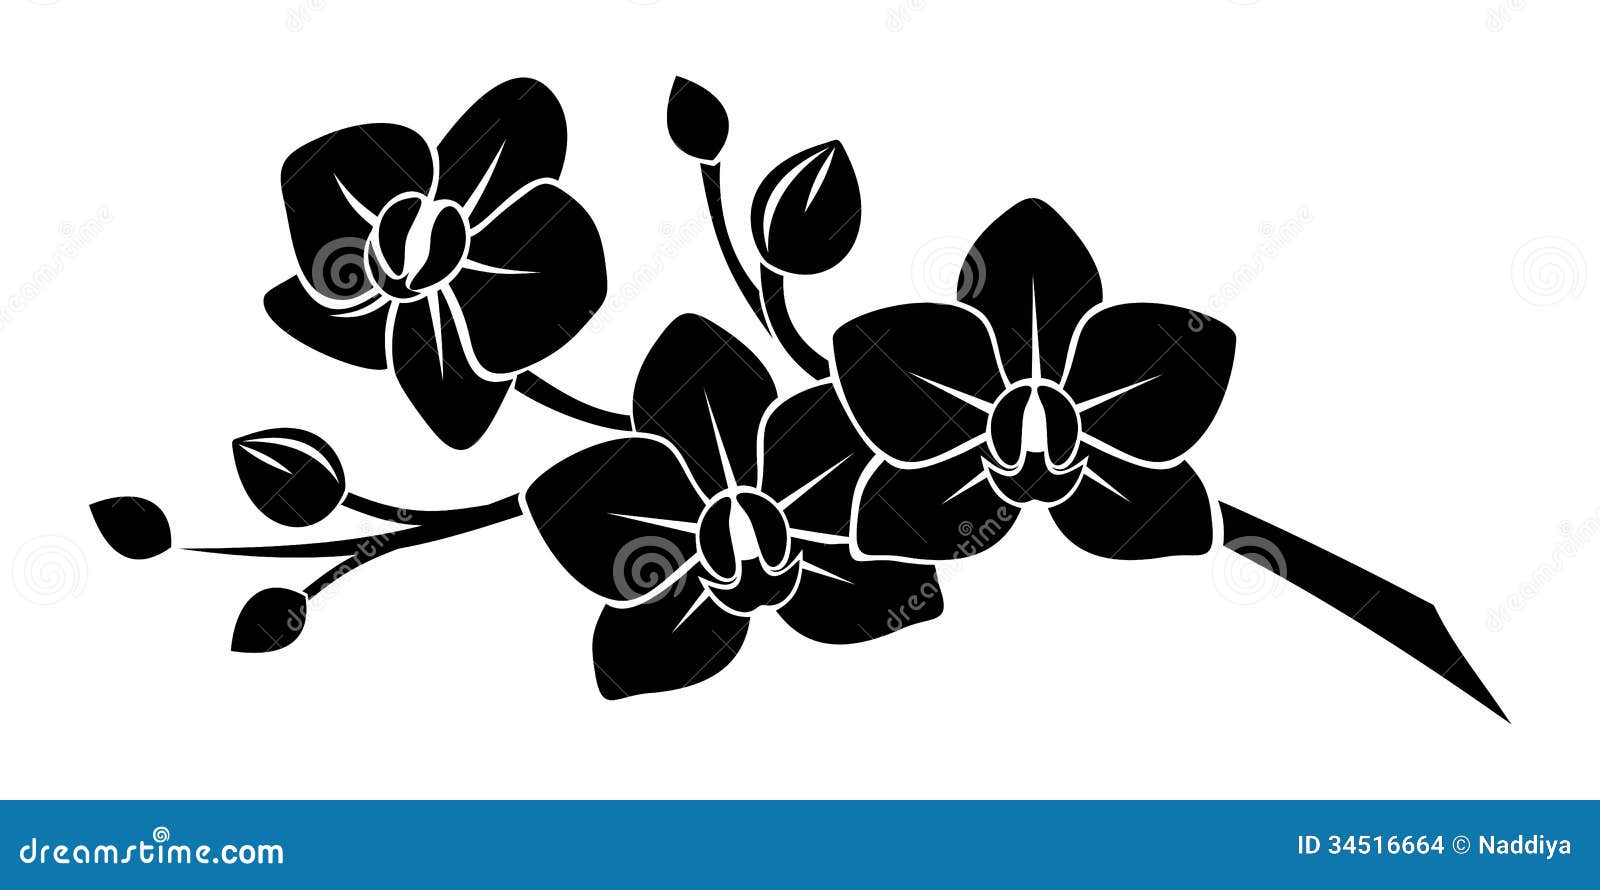 black silhouette of orchid flowers.